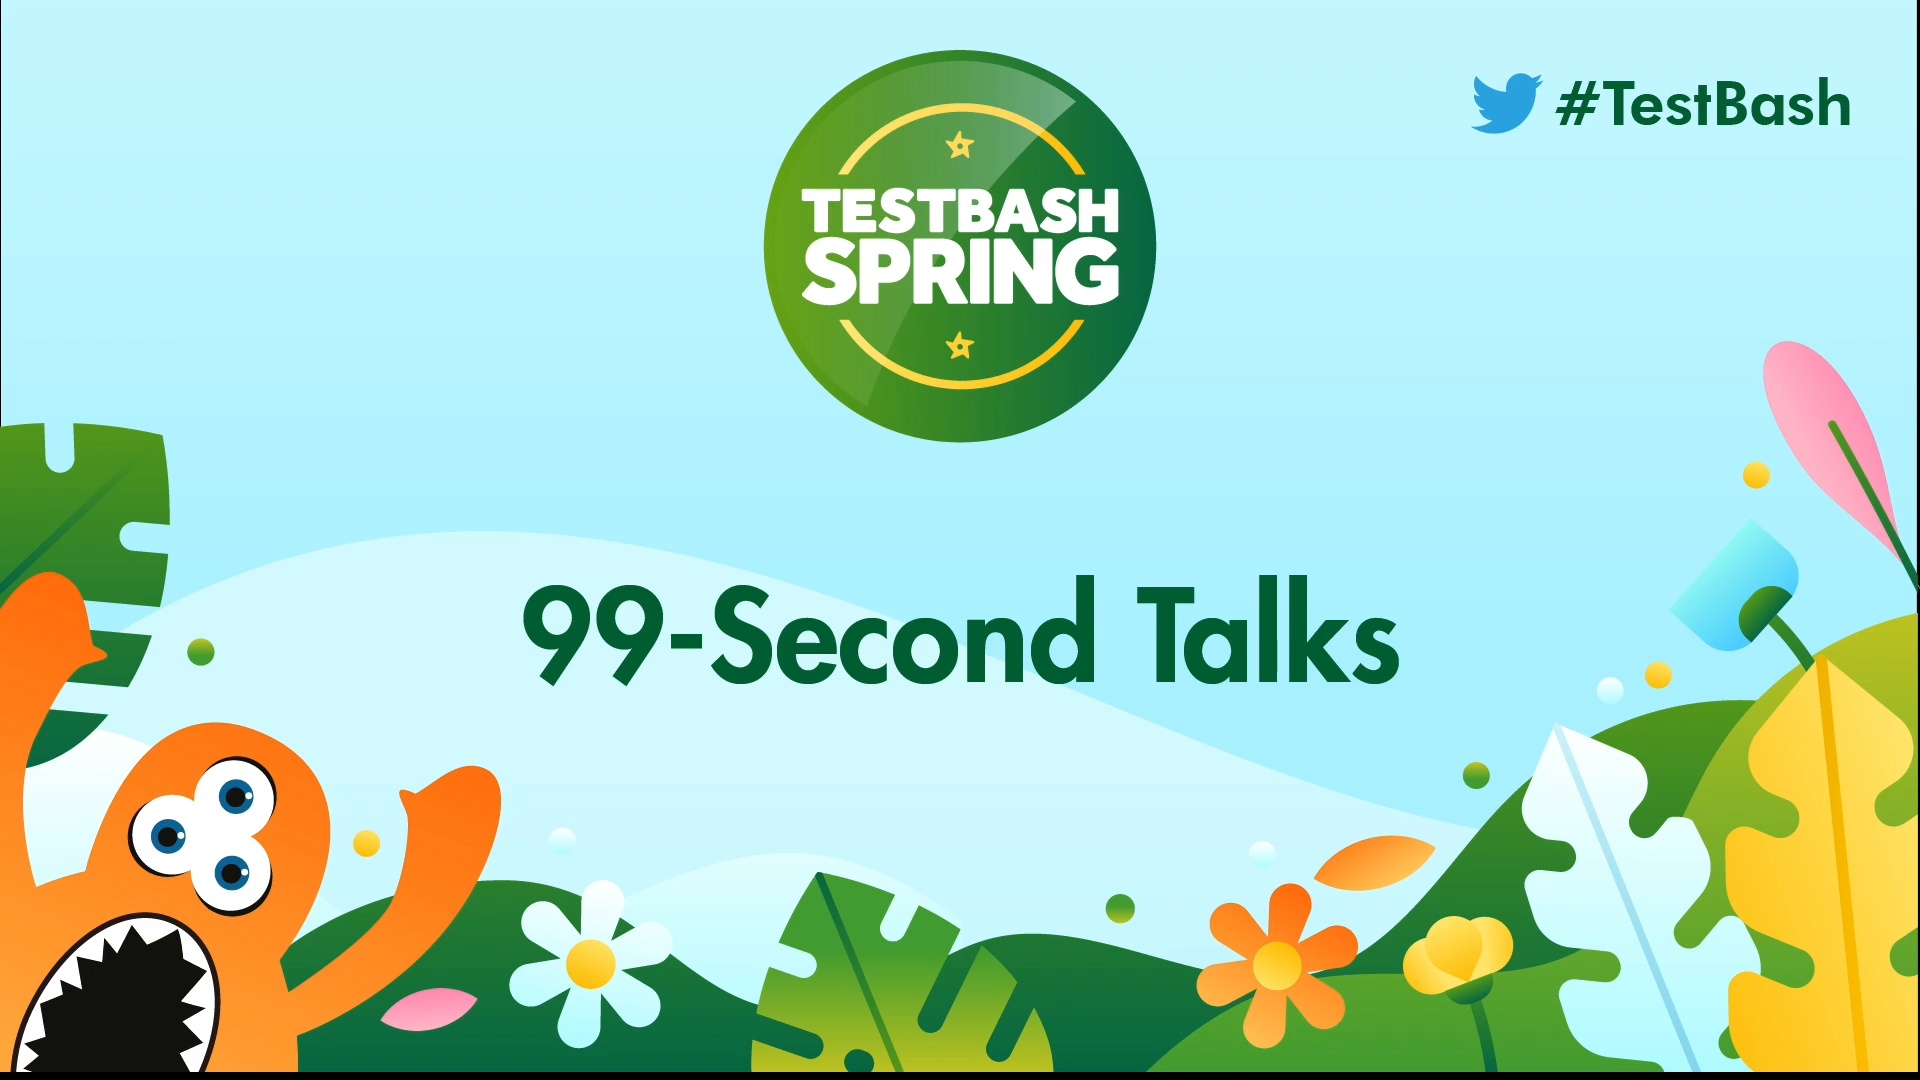 99-Second Talks at TestBash Spring